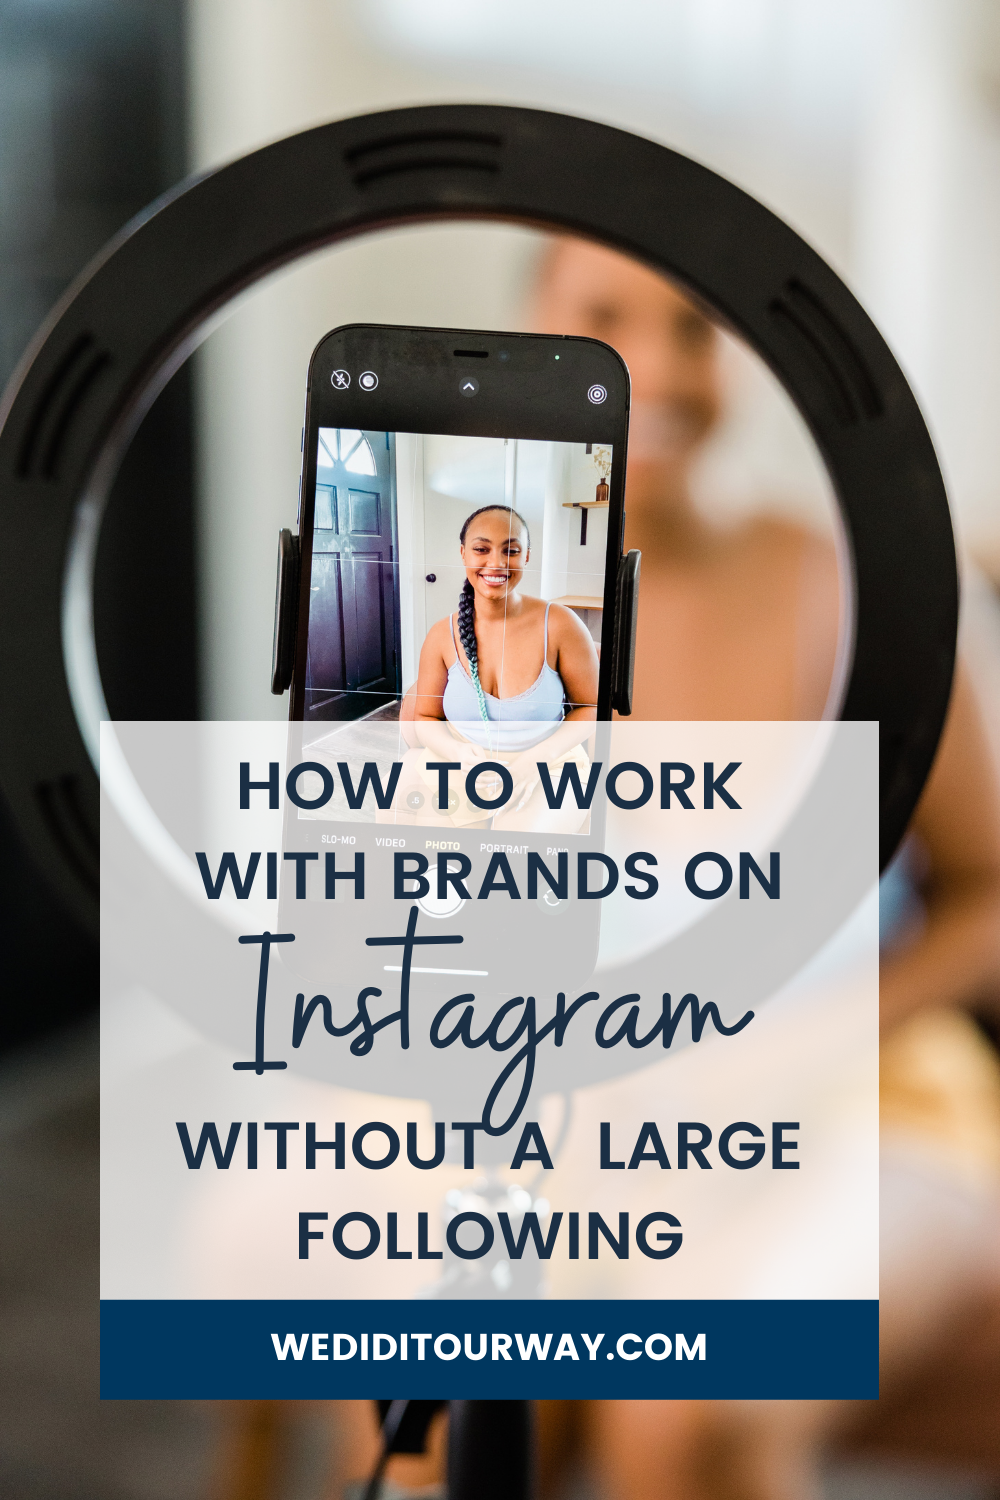 Work with brands on Instagram without a large following